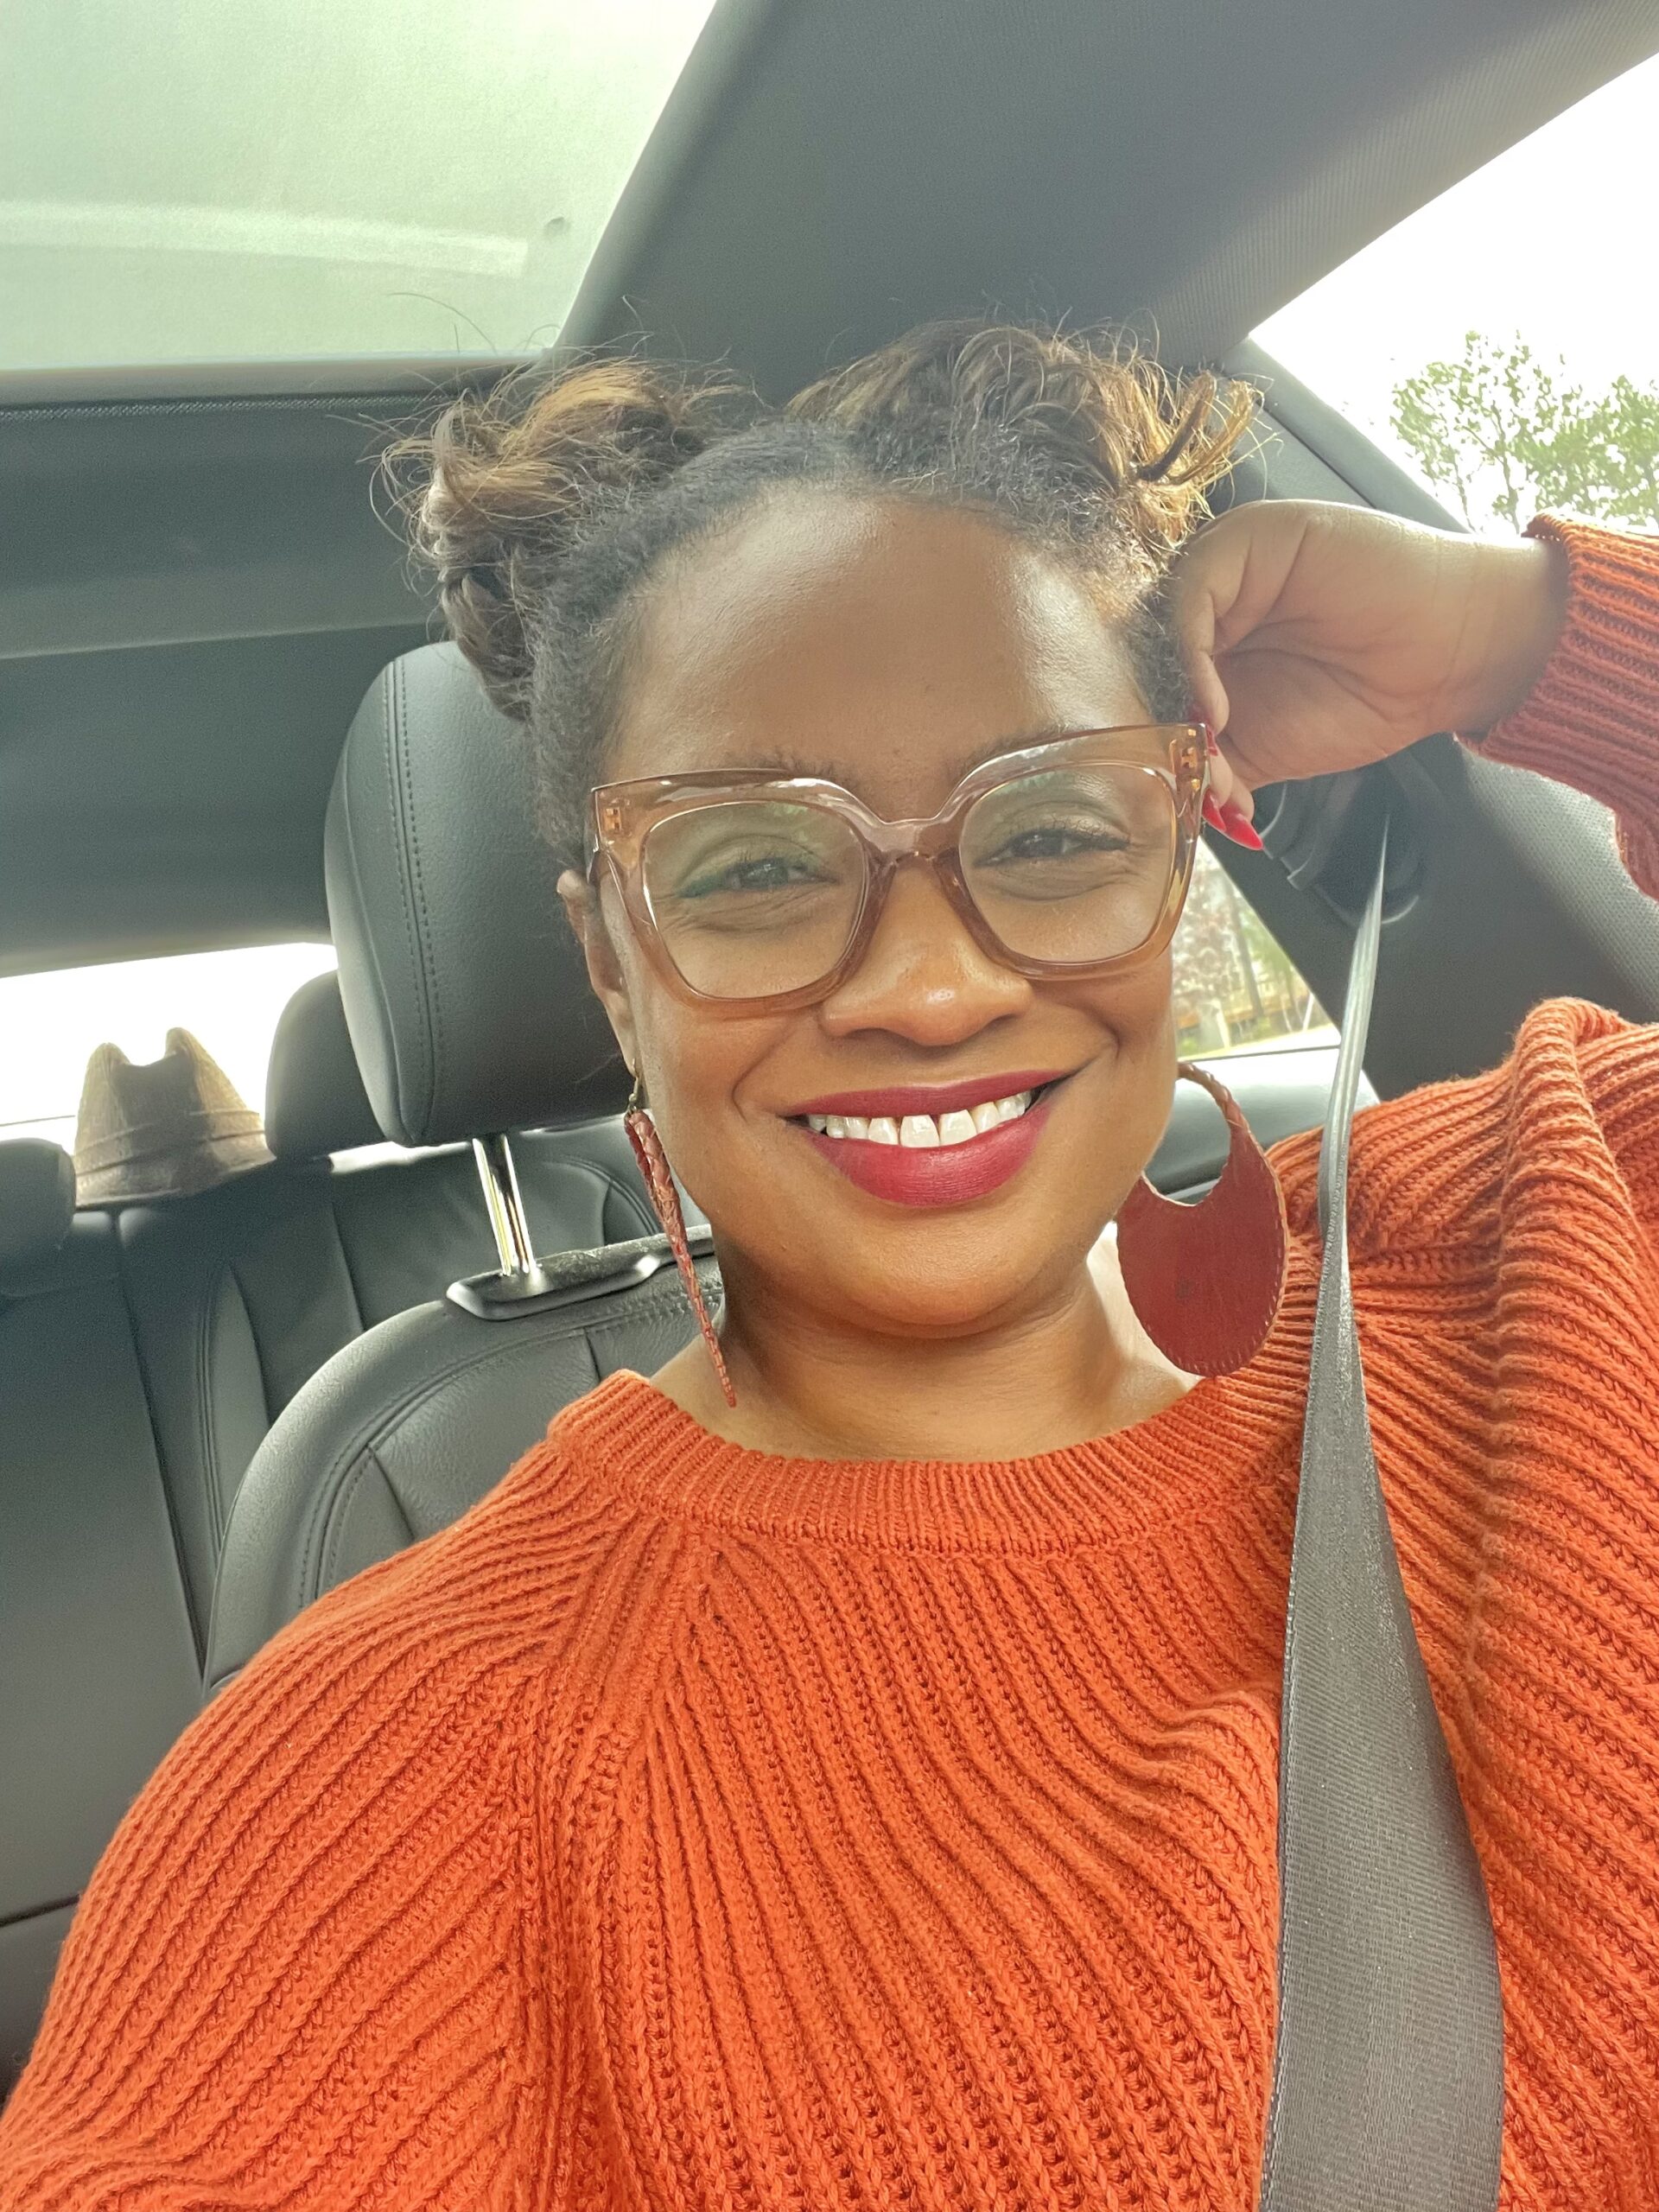 A smiling Black woman with brown skin, red lips and nails and a bright orange sweater